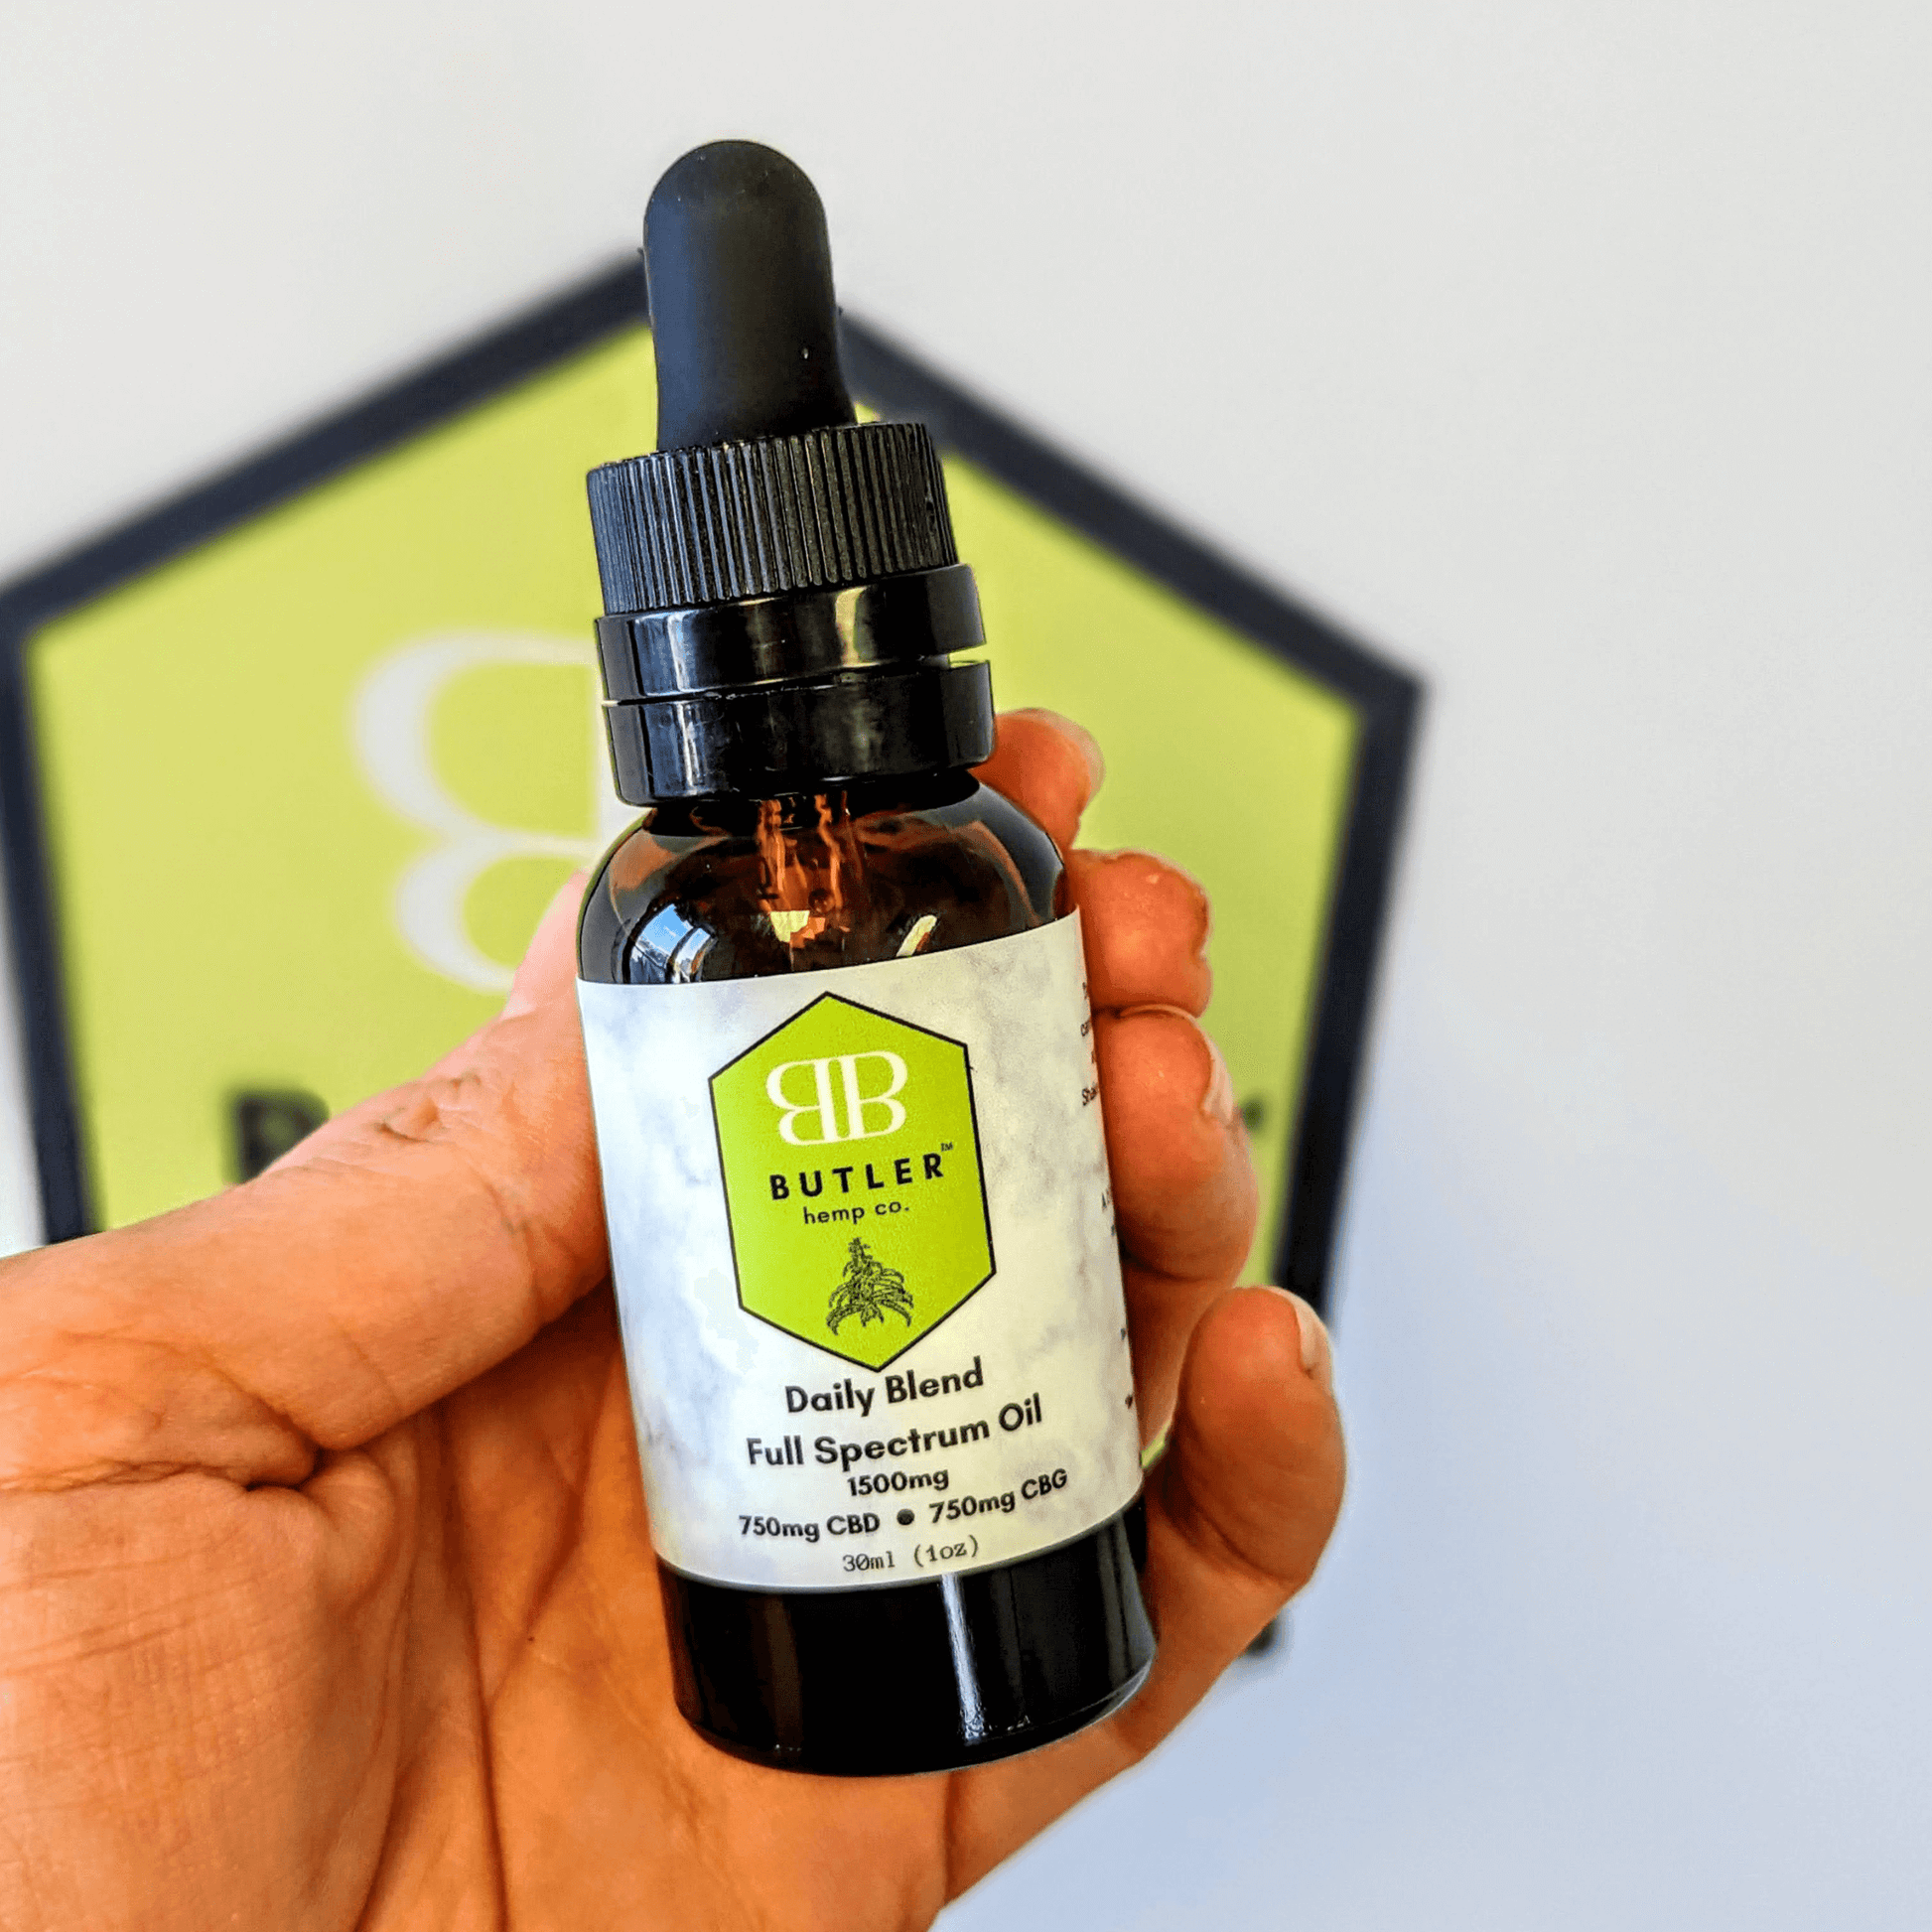 alt=our newly reformulated Daily Blend Full Spectrum Oil binds to endocannabinoid receptors to help manage pain, minimize stress, and promote increased focus, providing overall balance and calm to both body and mind.